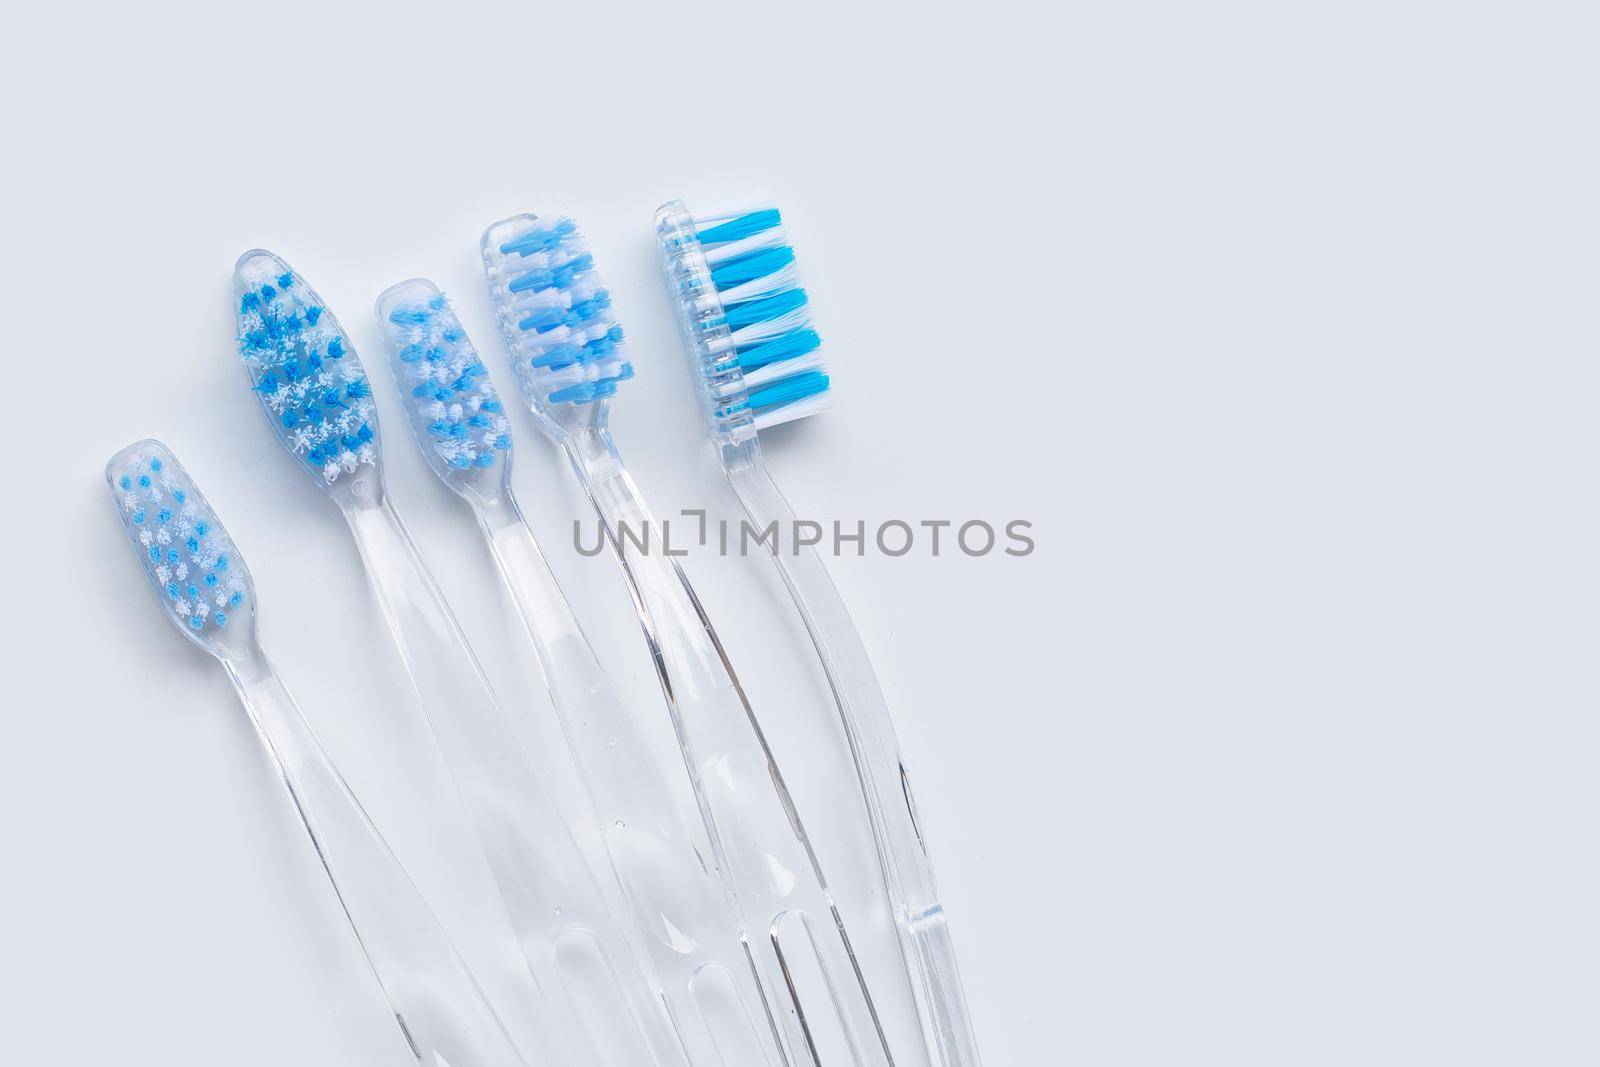 Toothbrushes on white background. Top view by Bowonpat